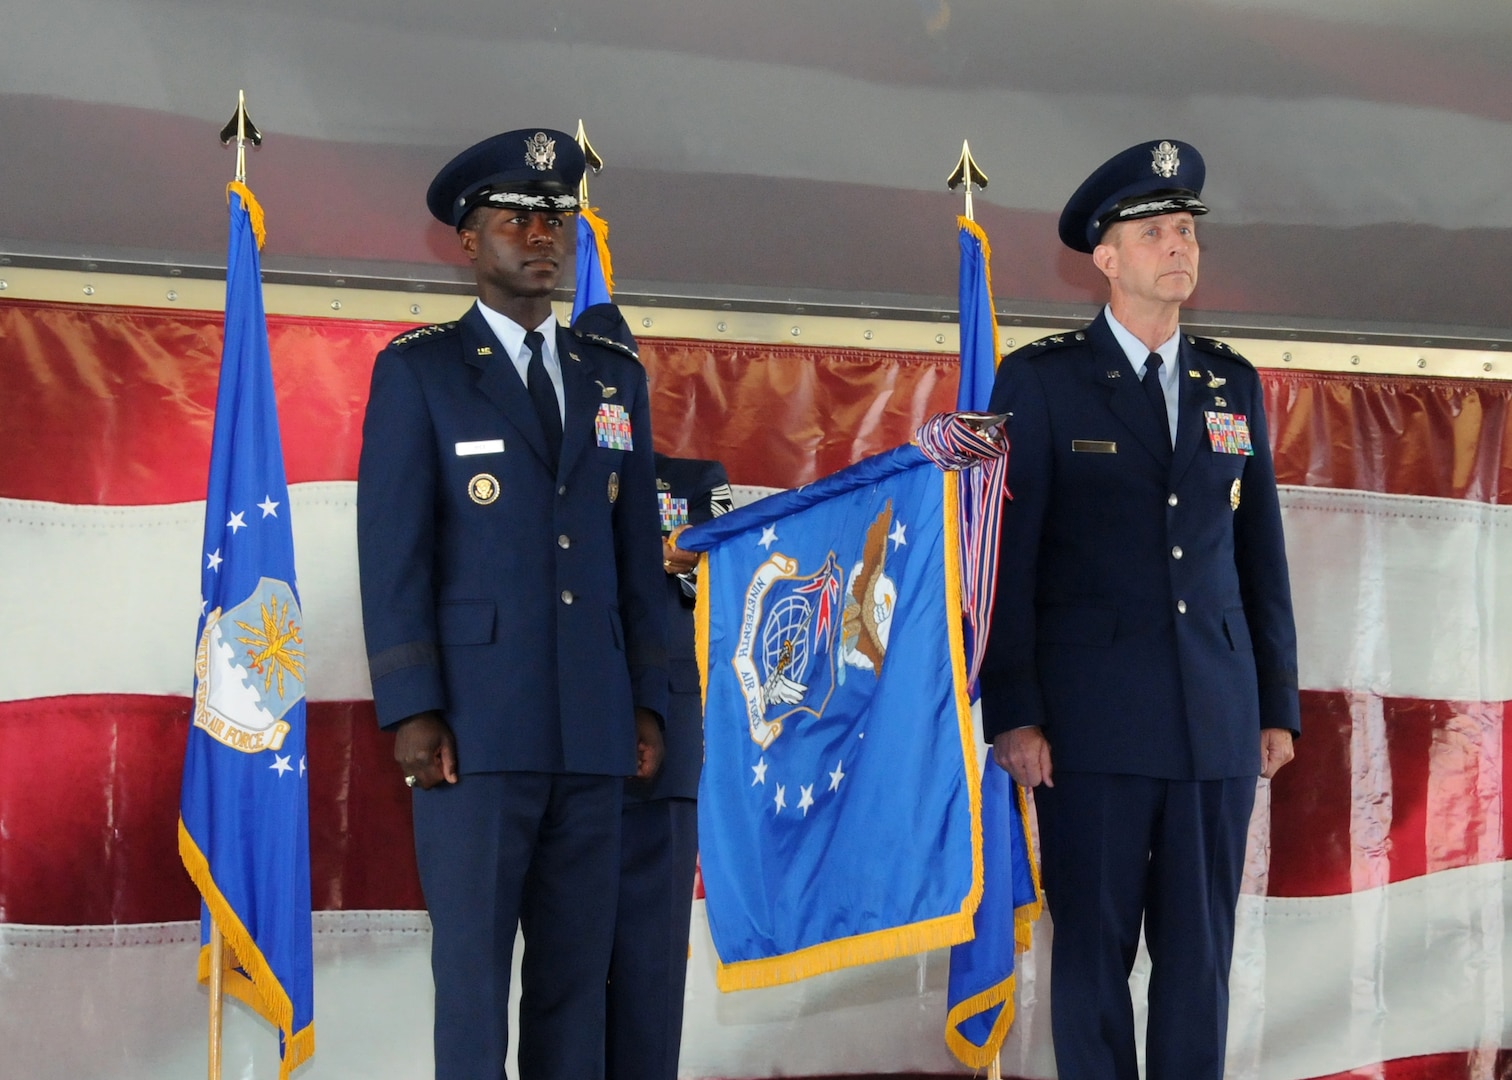 Gen. Edward A. Rice Jr. (left) Air Education and Training Command commander, and Maj. Gen. Mark Solo, 19th Air Force commander, furl the 19th AF flag at the inactivation ceremony held at Joint Base San Antonio-Randolph, Texas, July 12. (U.S. Air Force photo by Melissa Peterson)